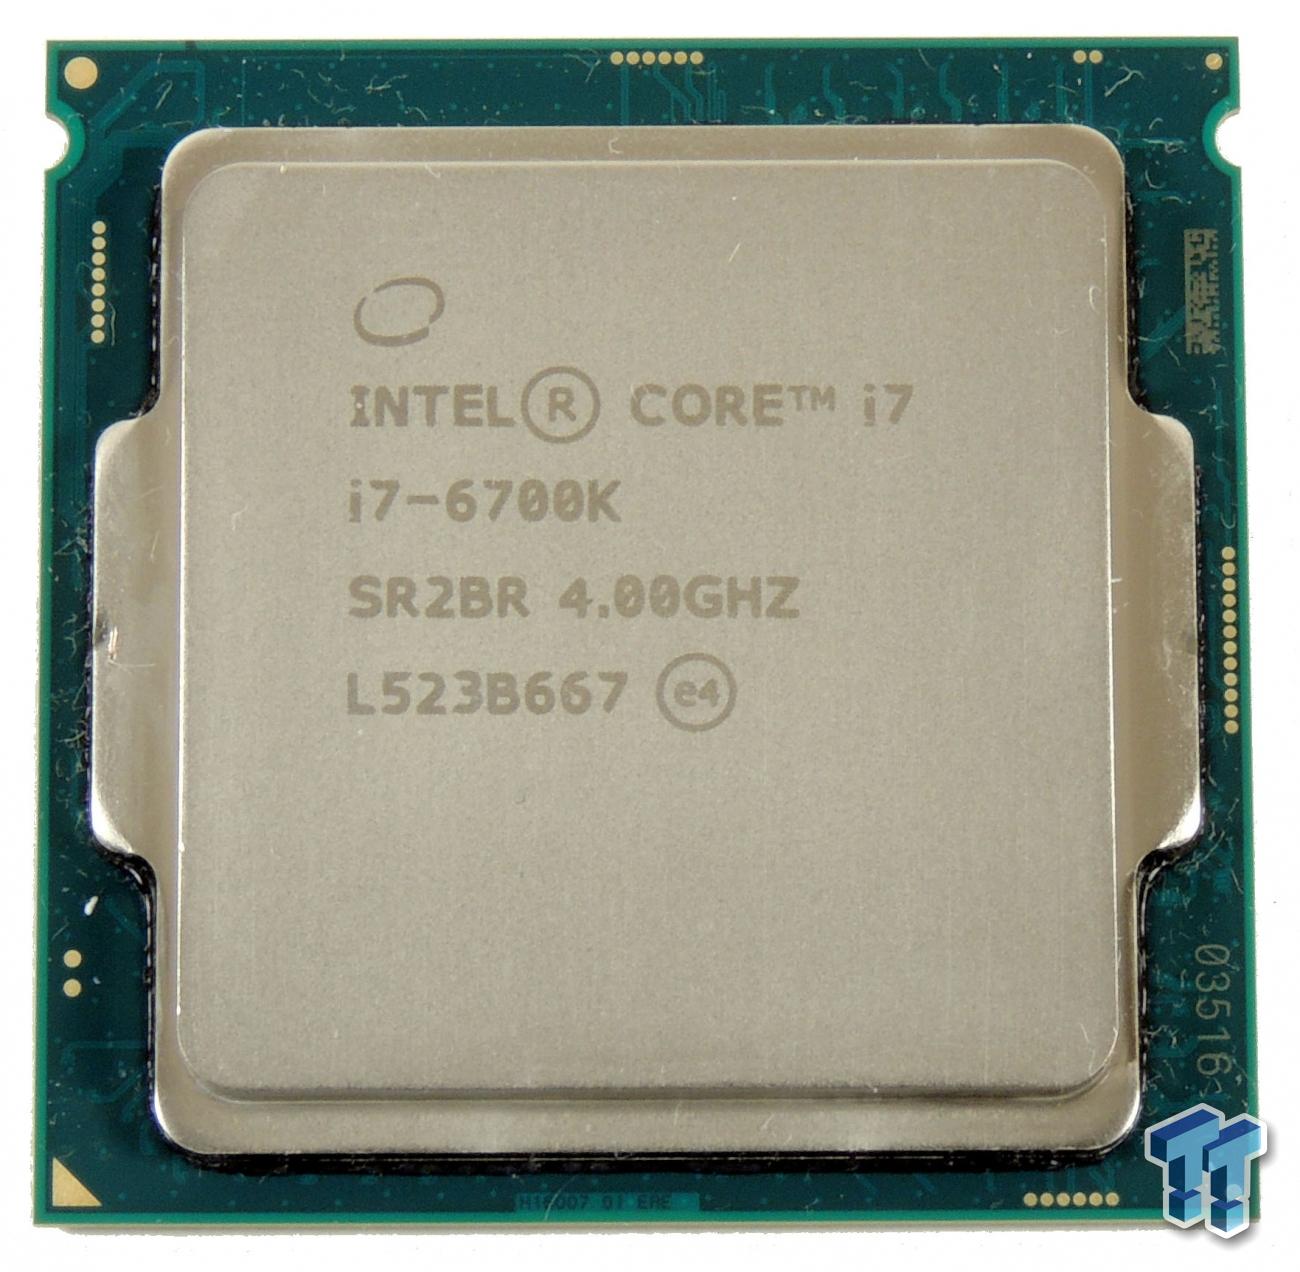 Intel Skylake Core i7-6700K CPU (Z170 Chipset and GT530) Review 